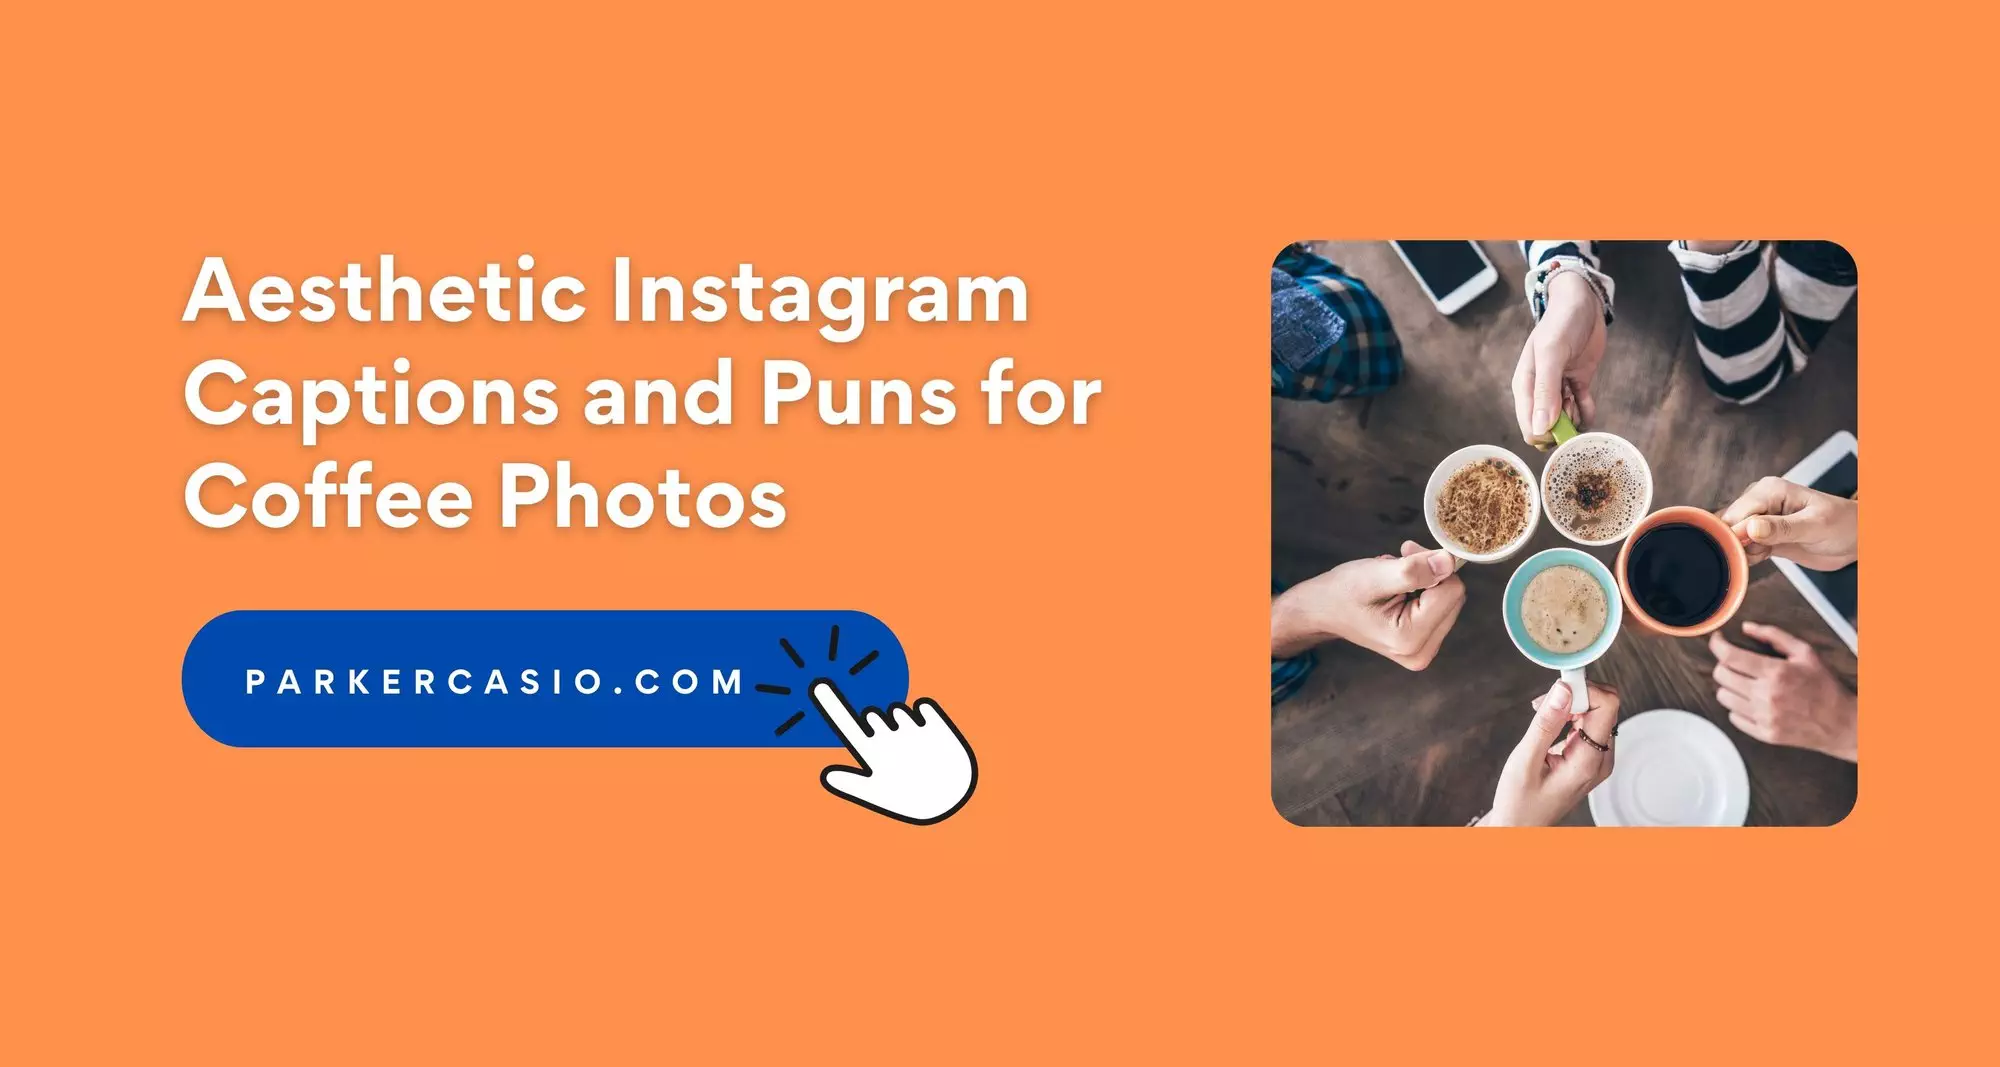 Aesthetic Instagram Captions and Puns for Coffee Photos